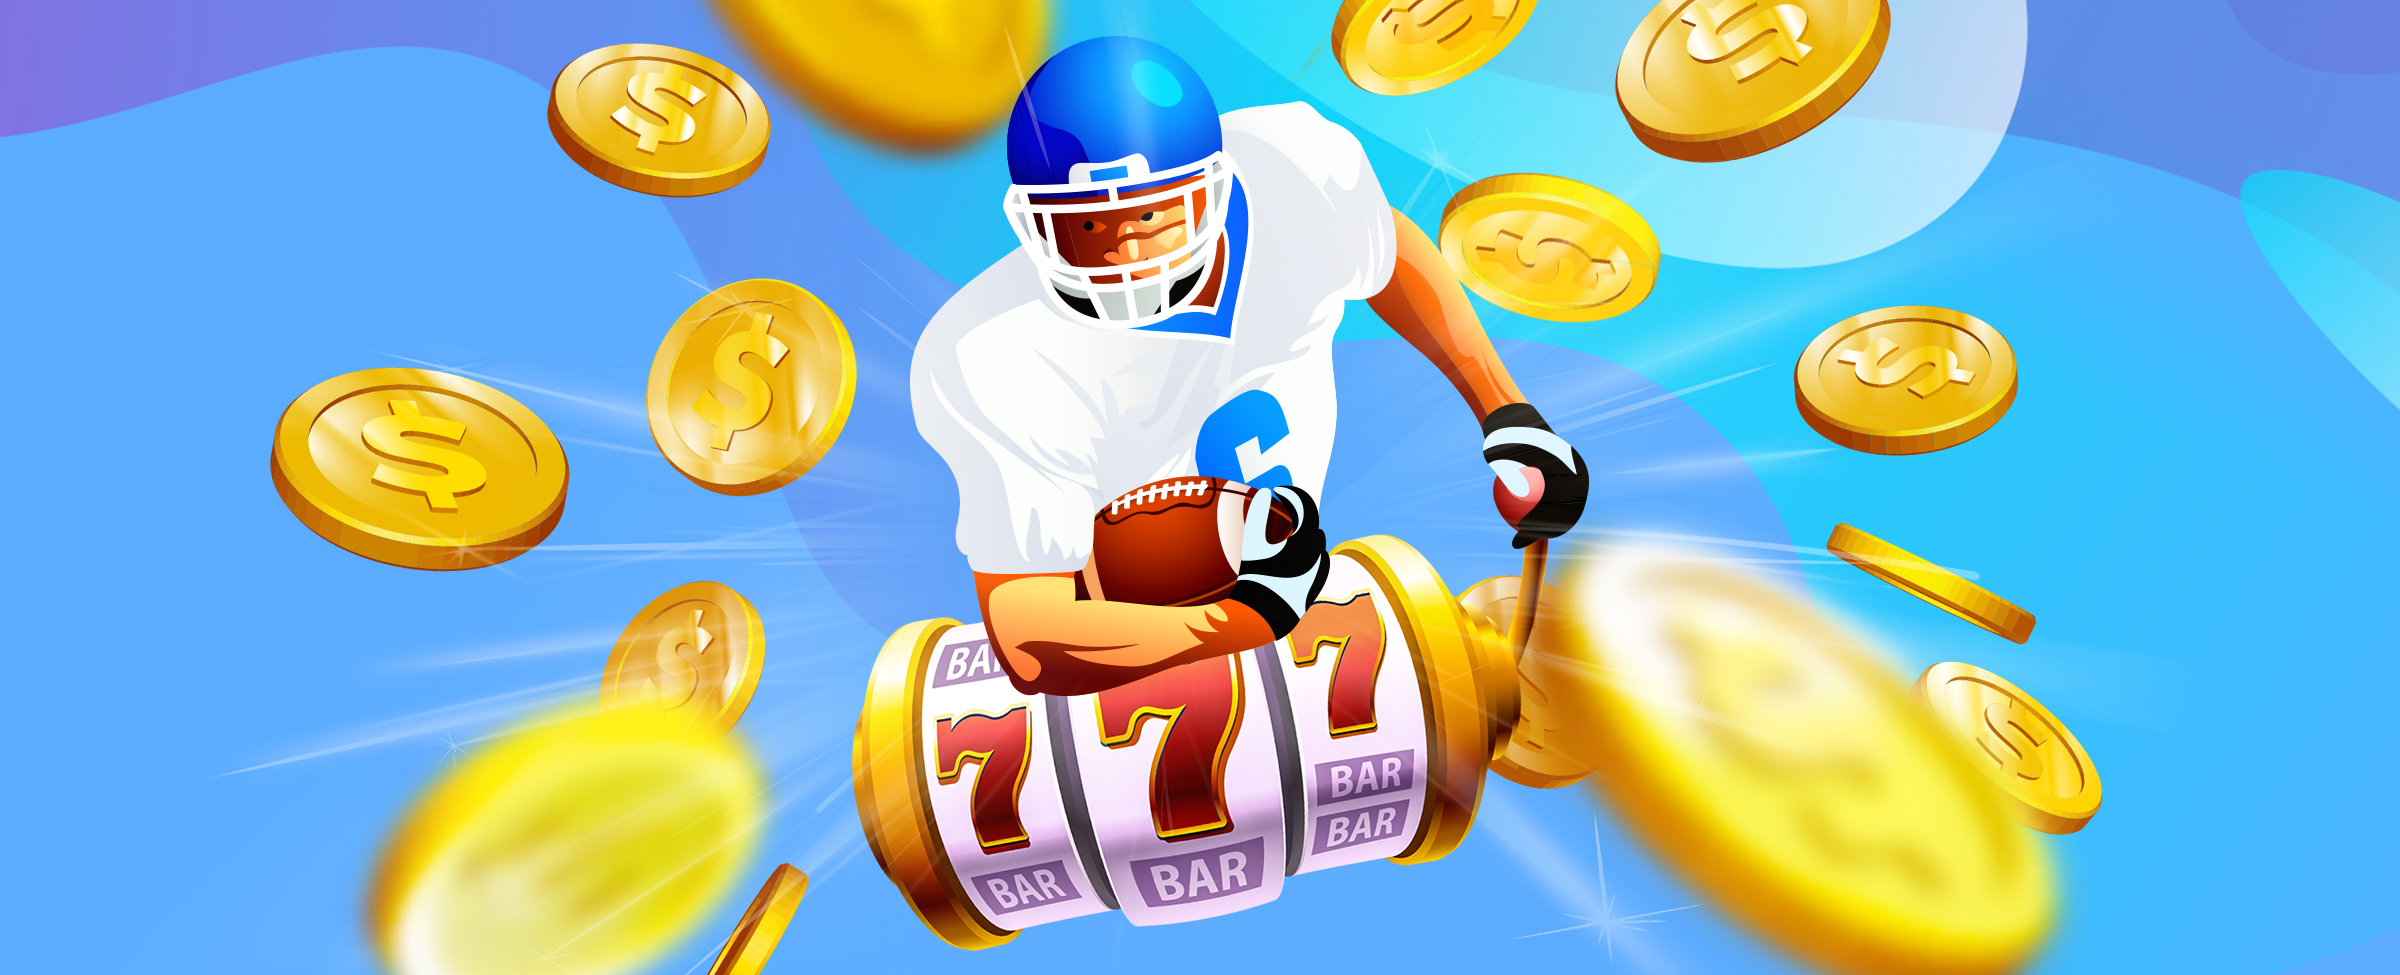 It’s fast approaching with fever-pitch anticipation, and you can’t get enough of it. It’s of course the Super Bowl LVI, so what better time to spin these NFL slot games?